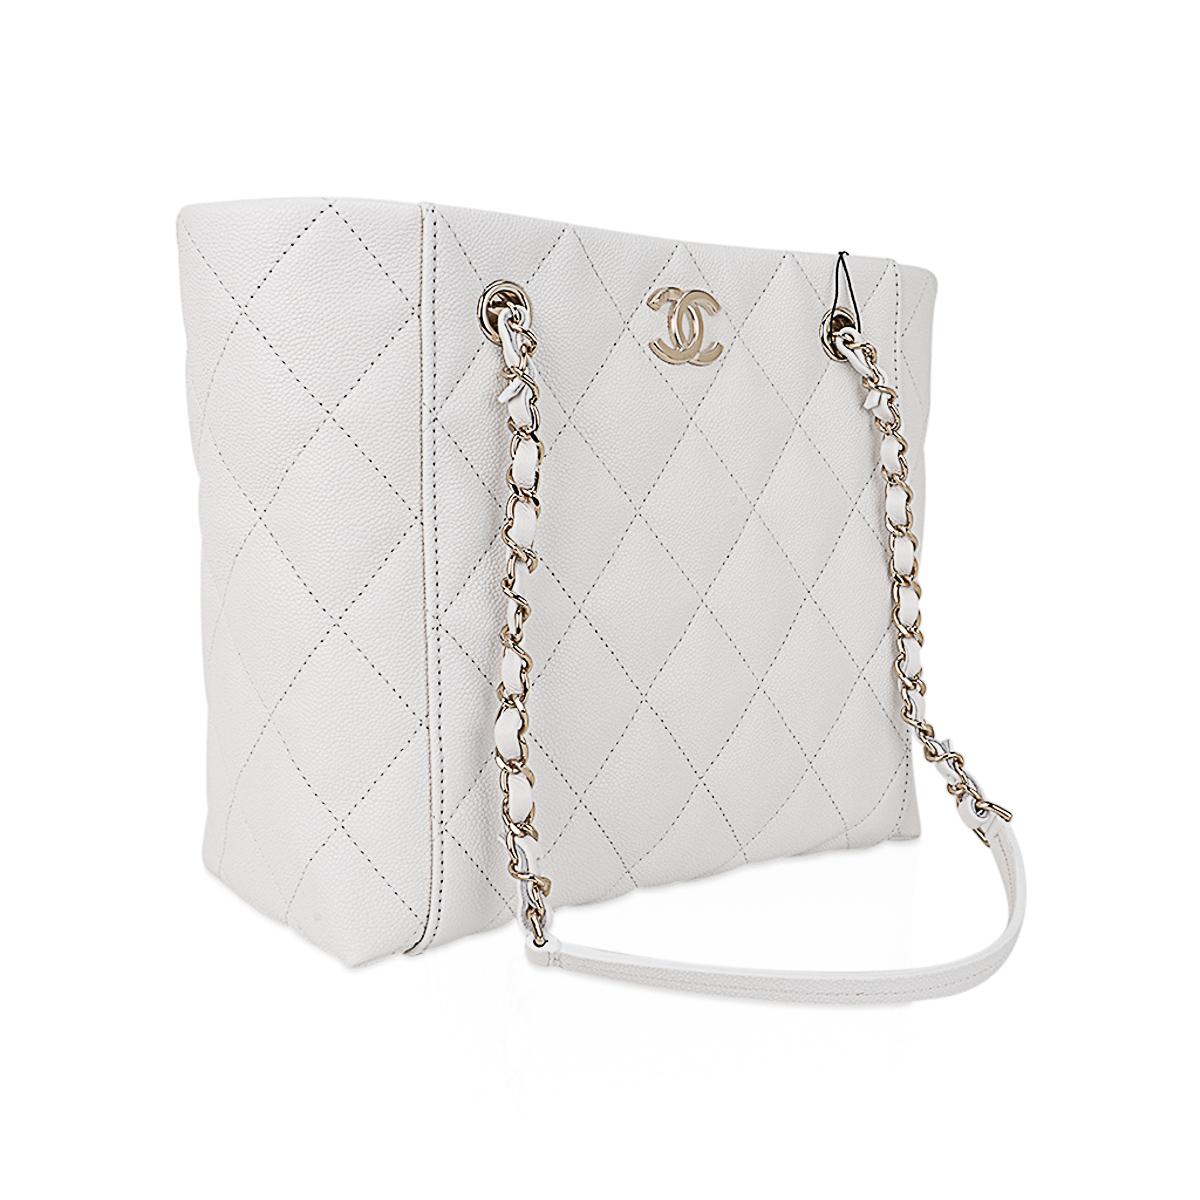 limited edition Chanel 2023 White Large Shopping Tote bag featured in quilted caviar leather.
Gold Hardware with signature CC logo.
Leather interlaced chain handles with leather at shoulder area.
Magnetic leather strip for closure.
The interior has